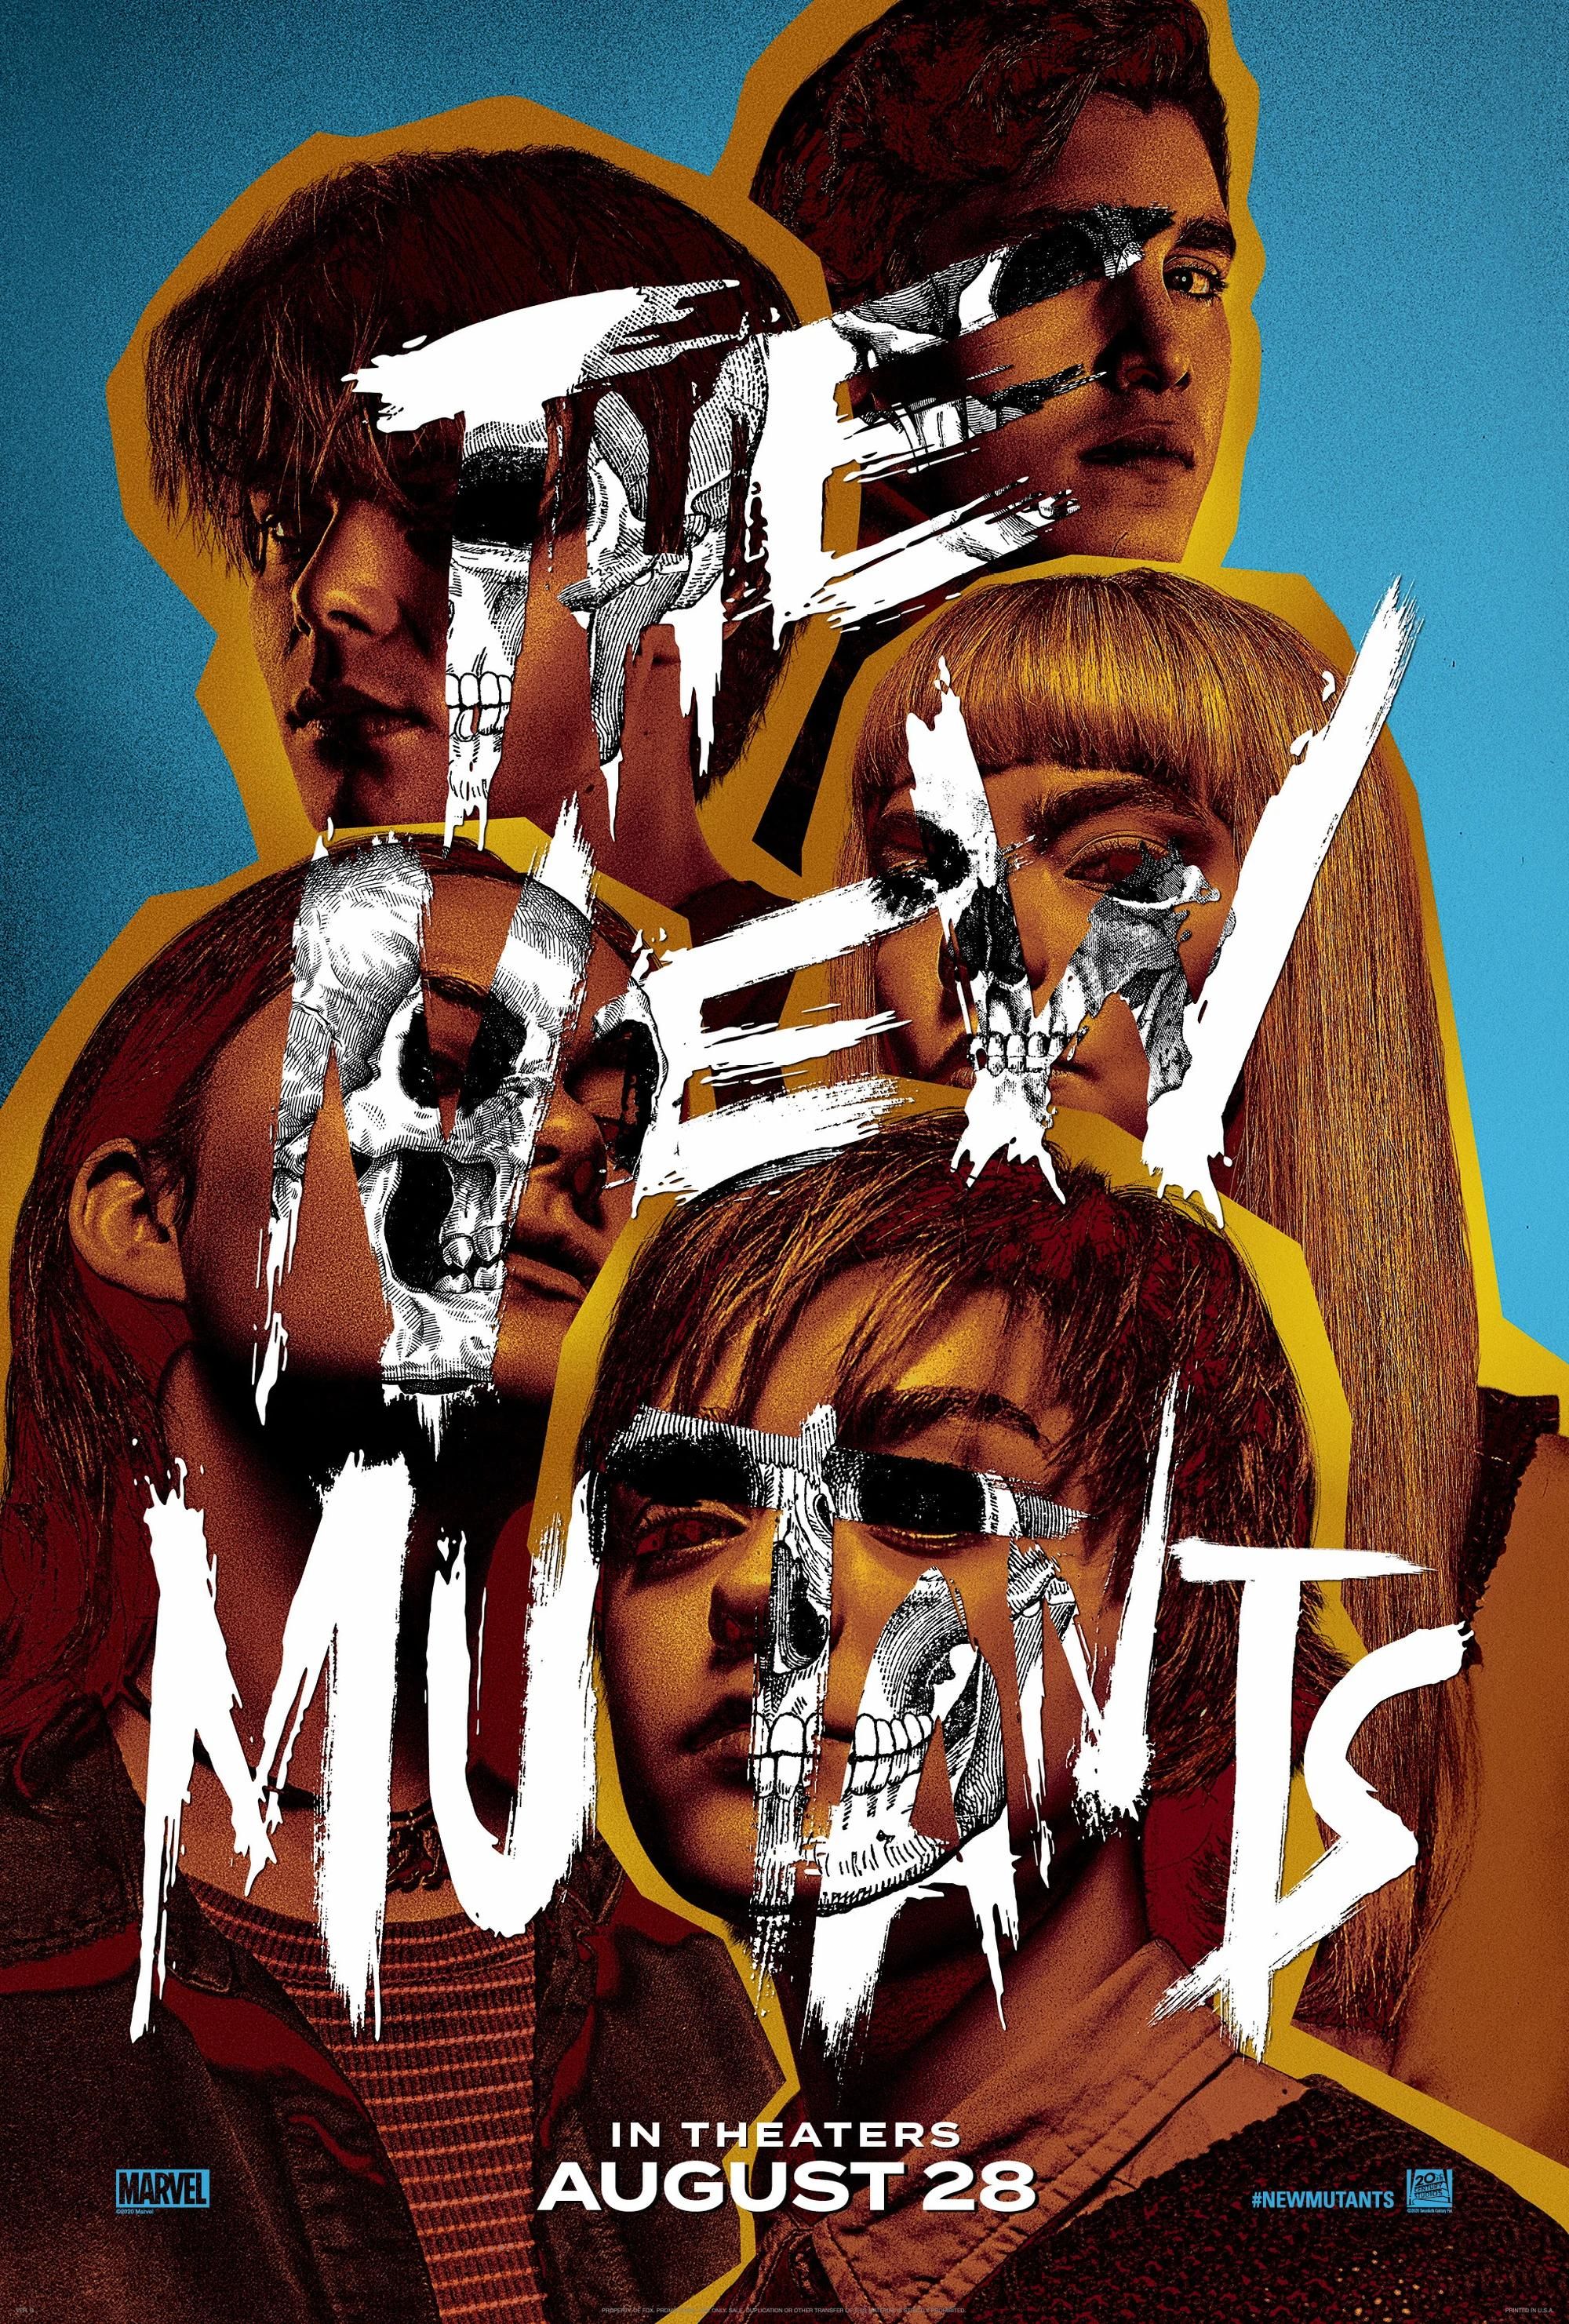 The New Mutants film poster features the cast with the films title graffitied over them.